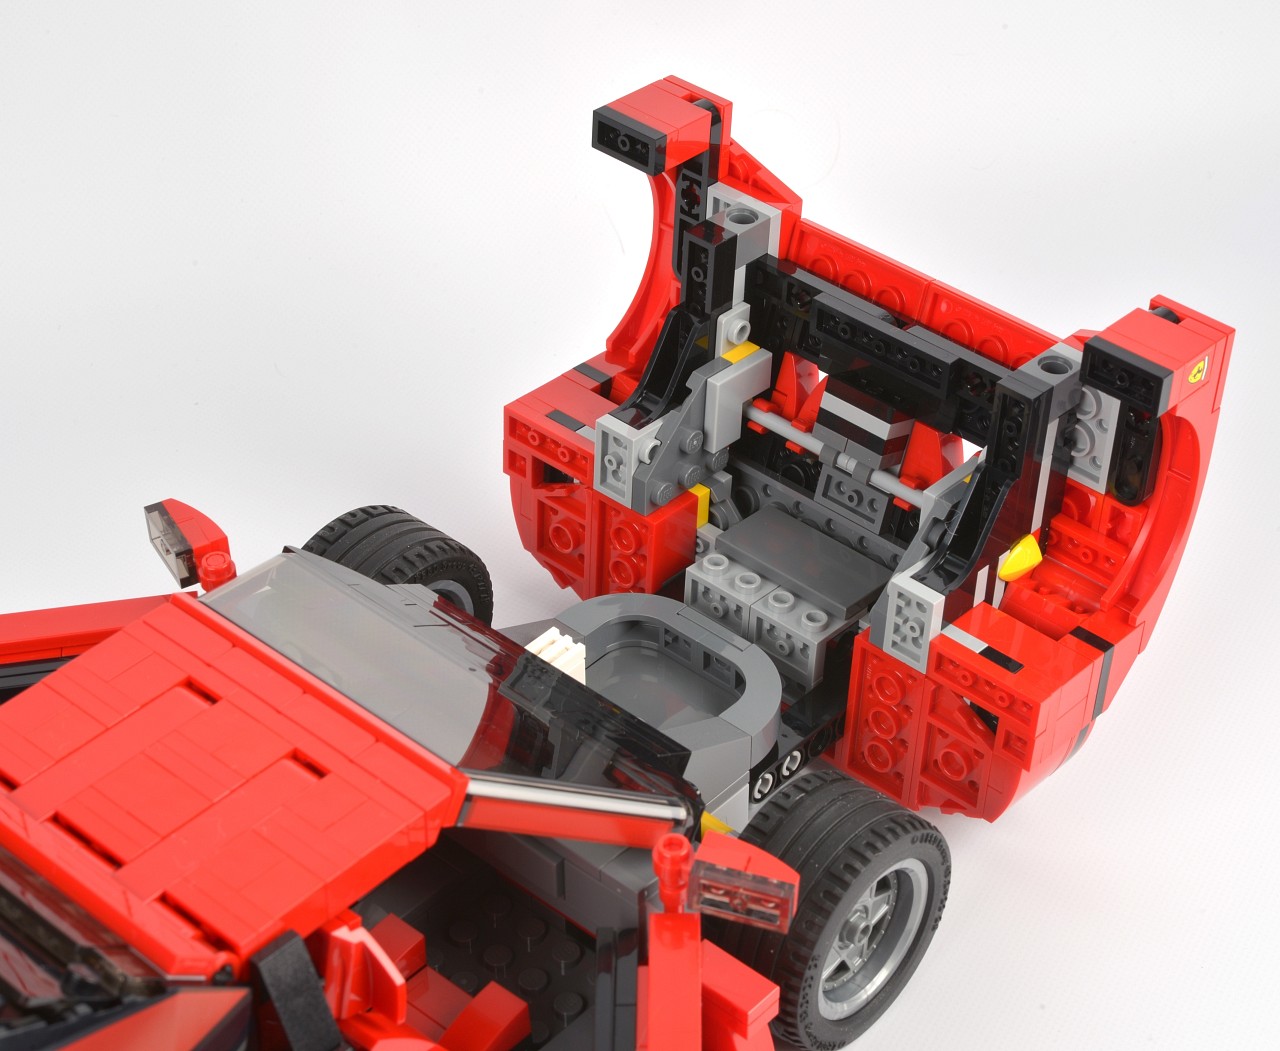 the inside of the lego car is red